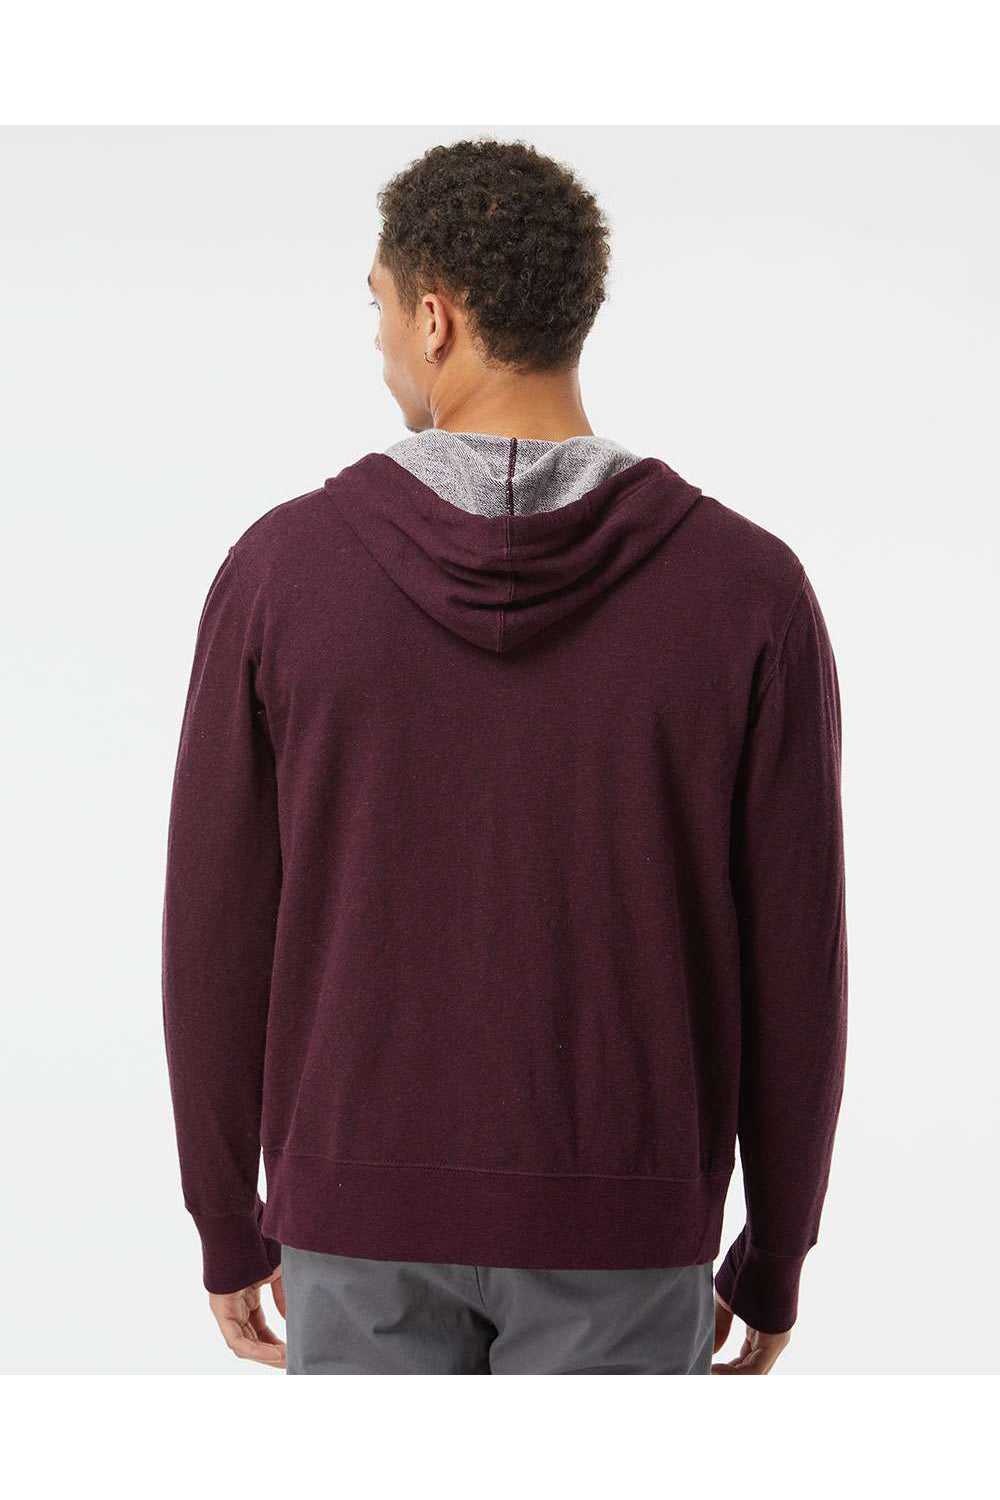 Independent Trading Co. PRM90HTZ Mens French Terry Full Zip Hooded Sweatshirt Hoodie Heather Burgundy Model Back